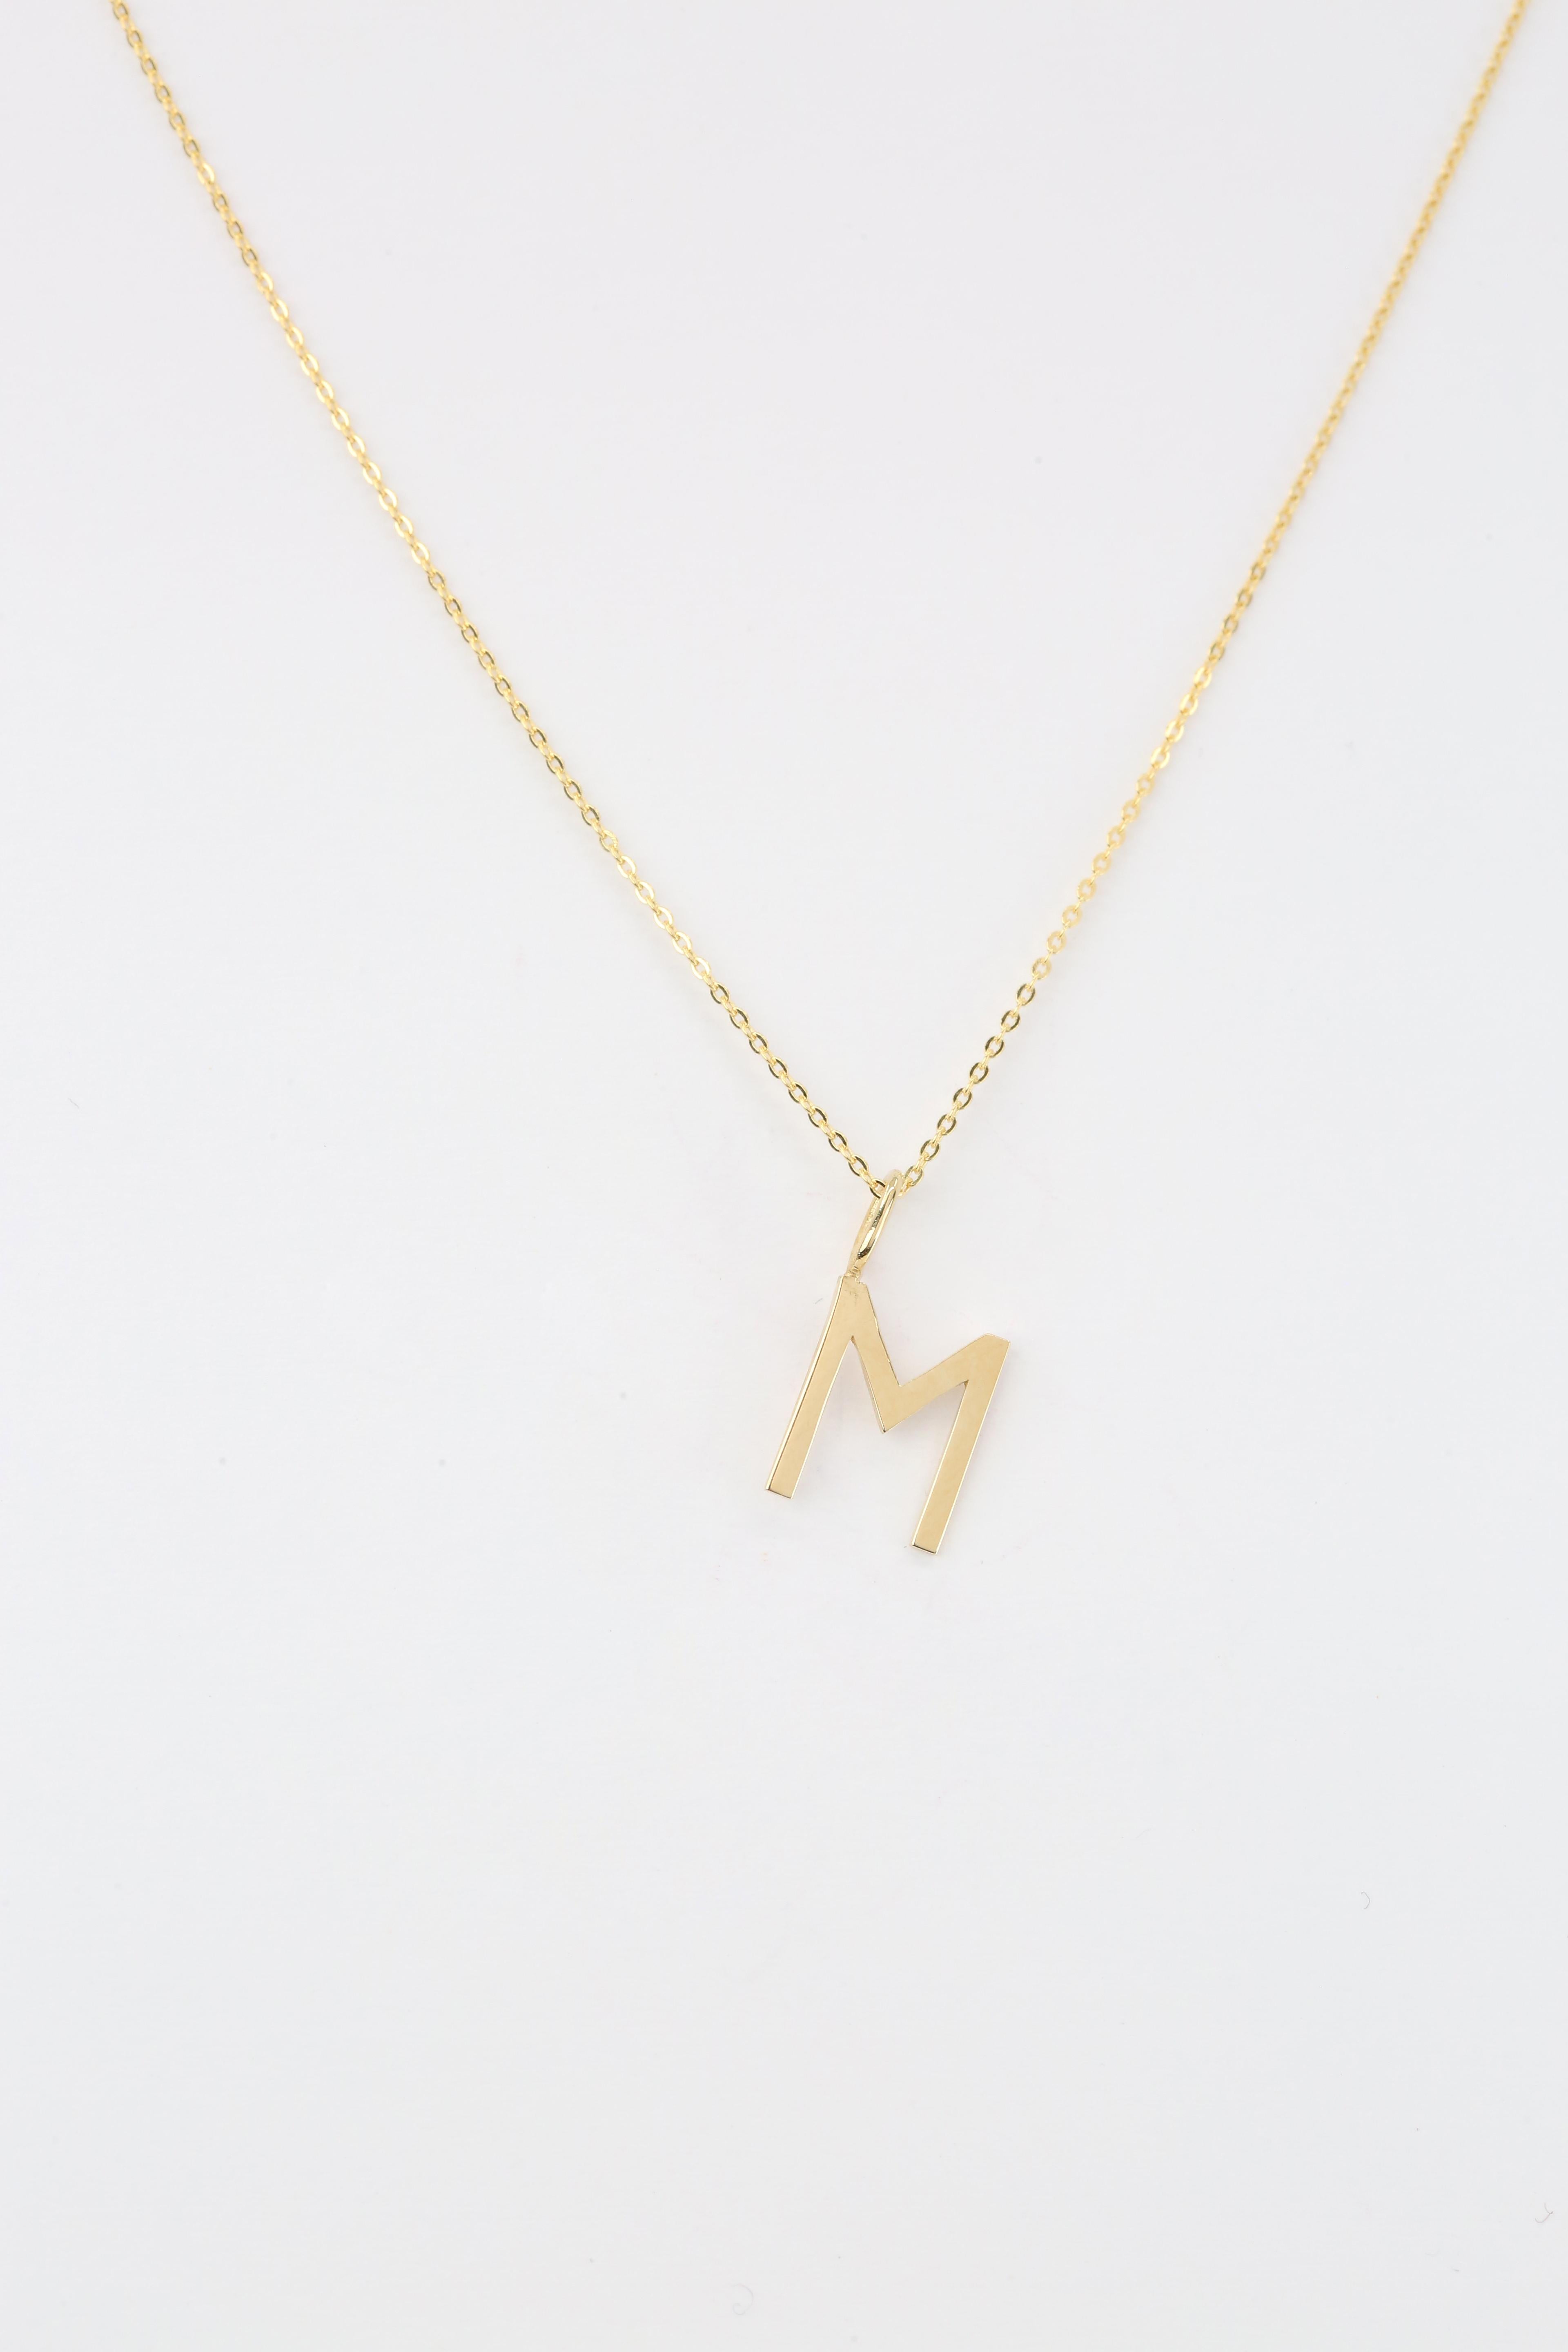 necklaces with the letter m